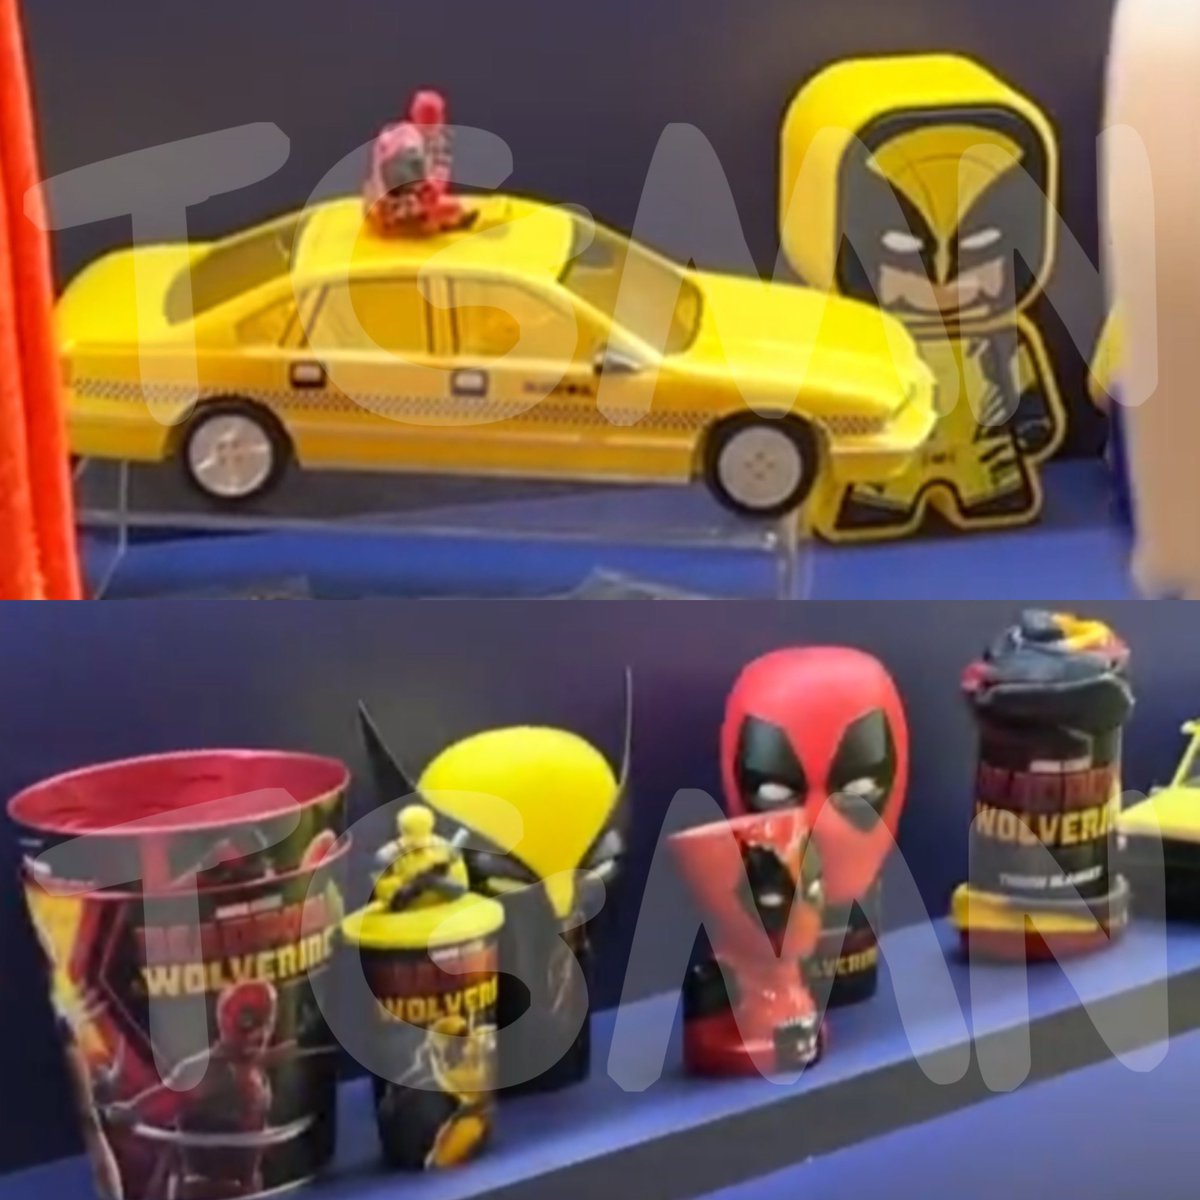 First look at some of the theater collectible items for Deadpool & Wolverine 🍿